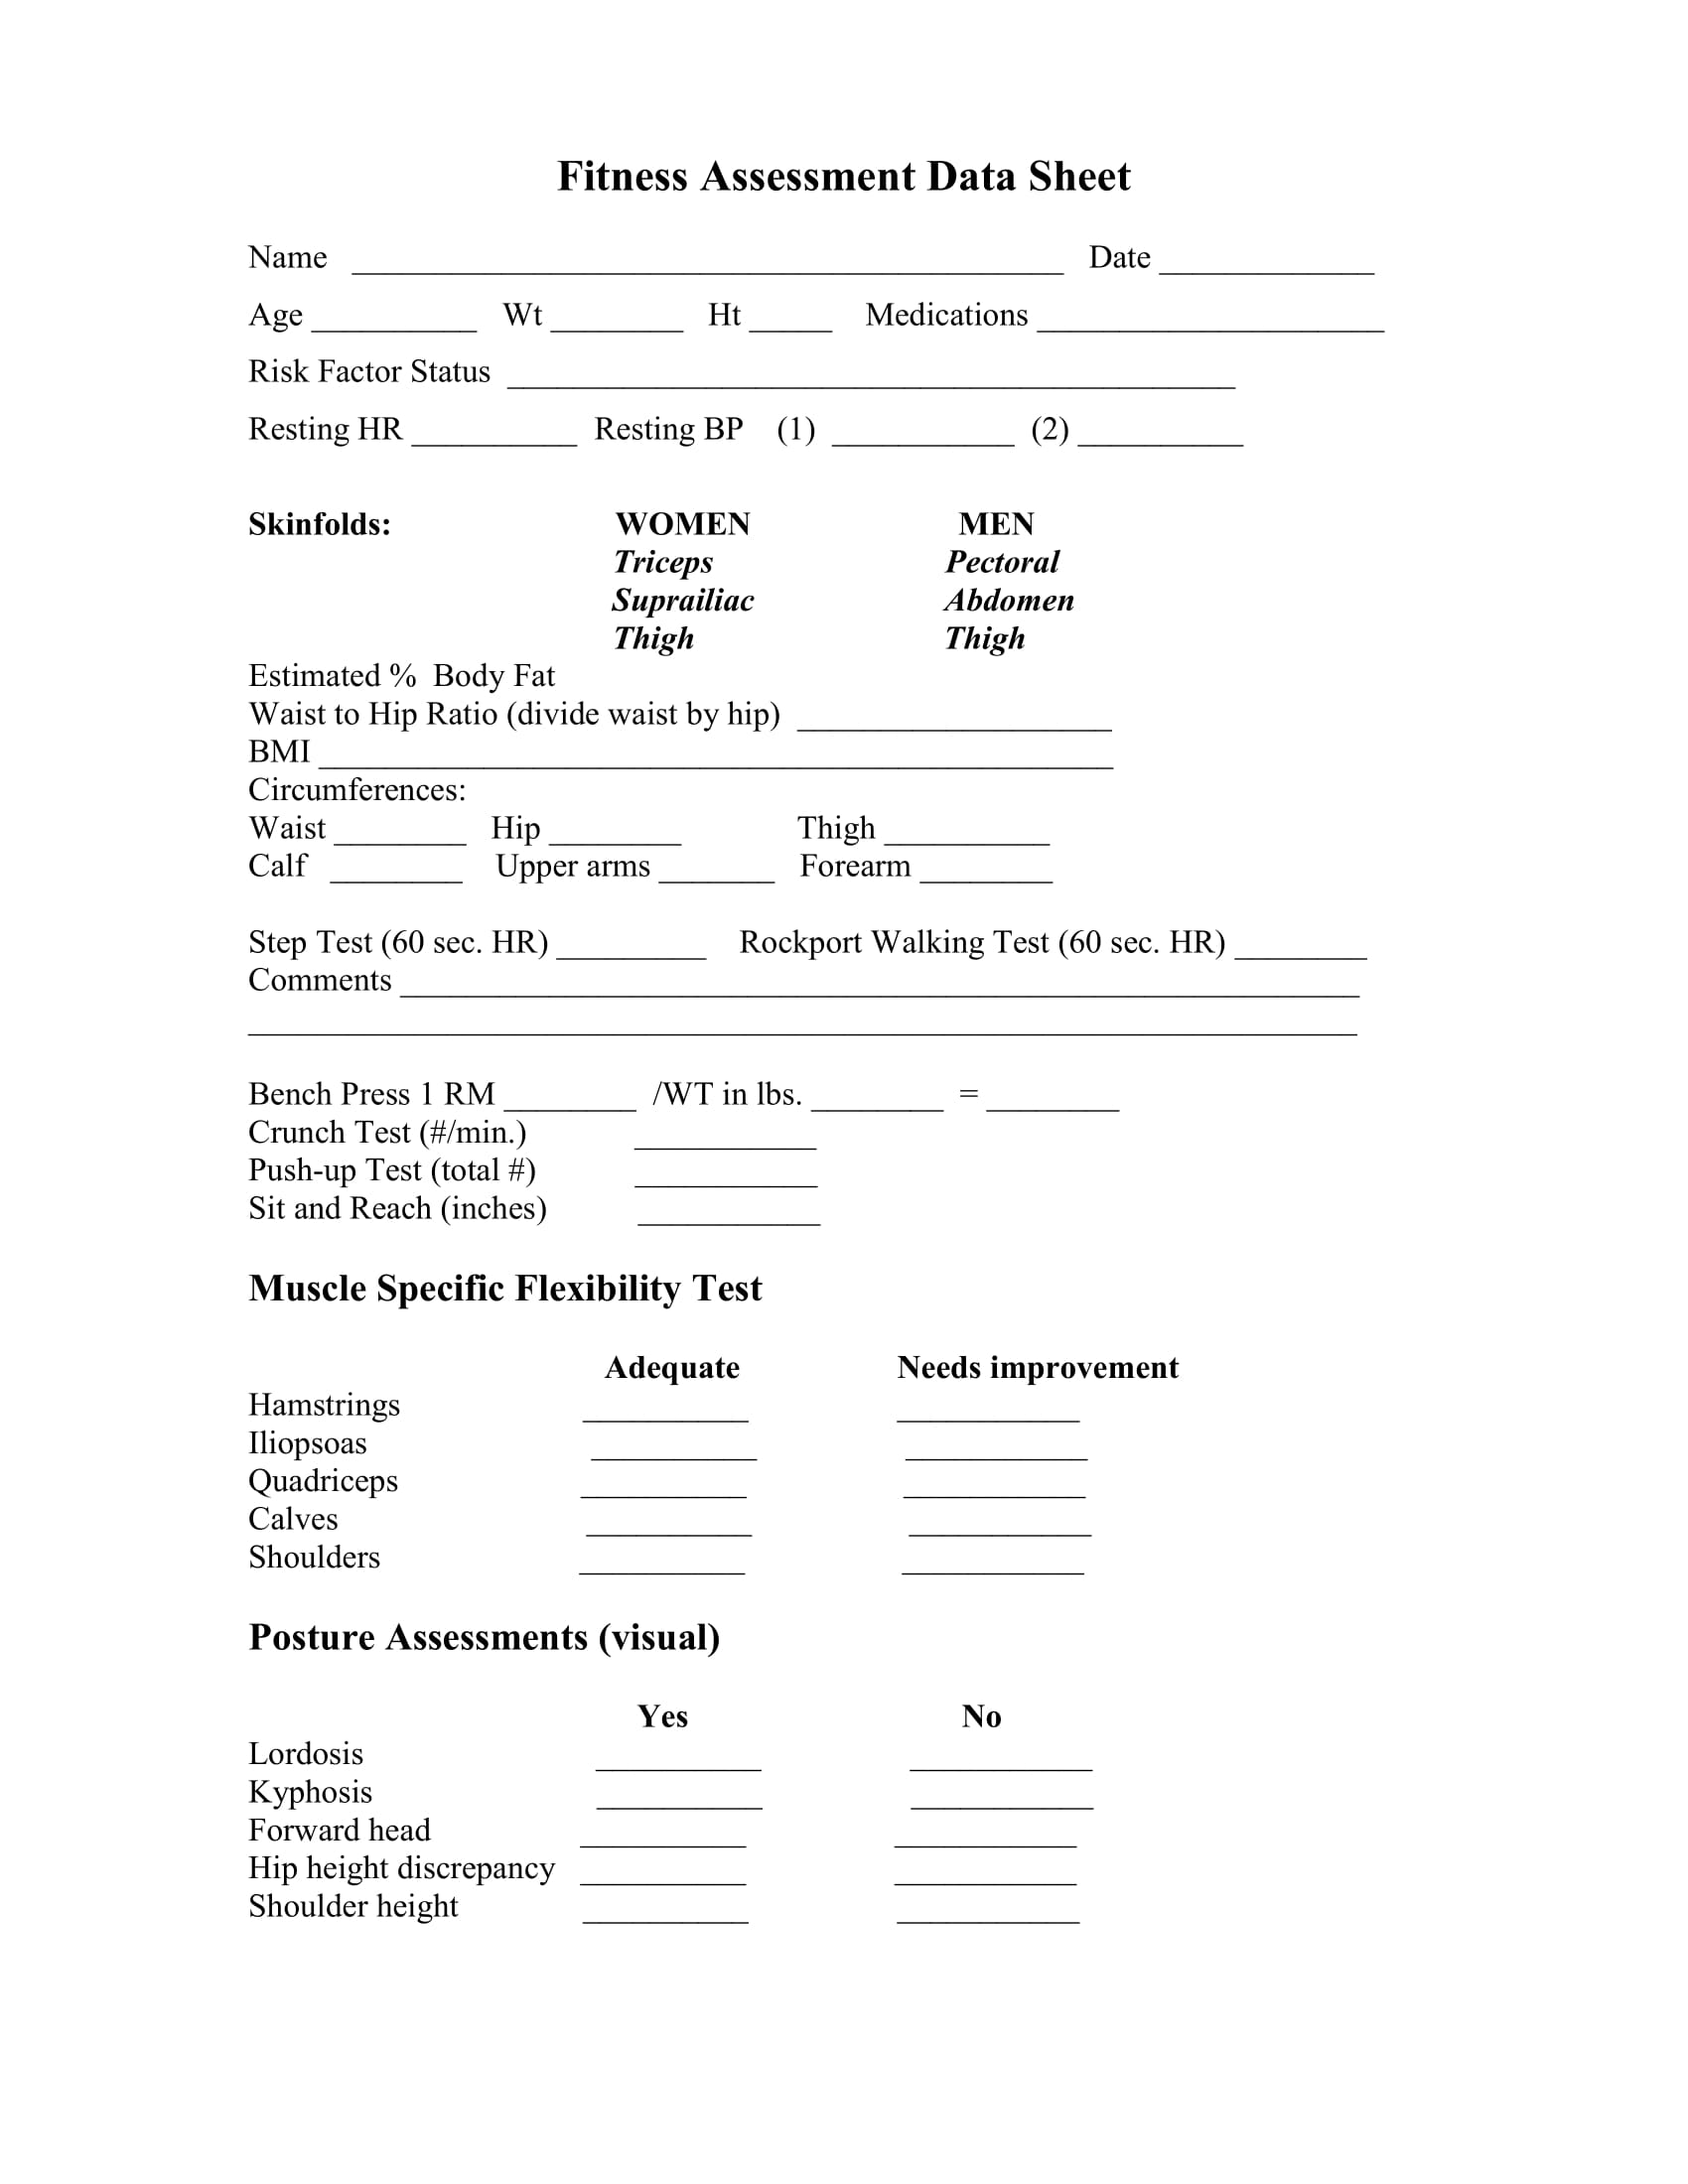 Fitness assessment forms for personal trainers